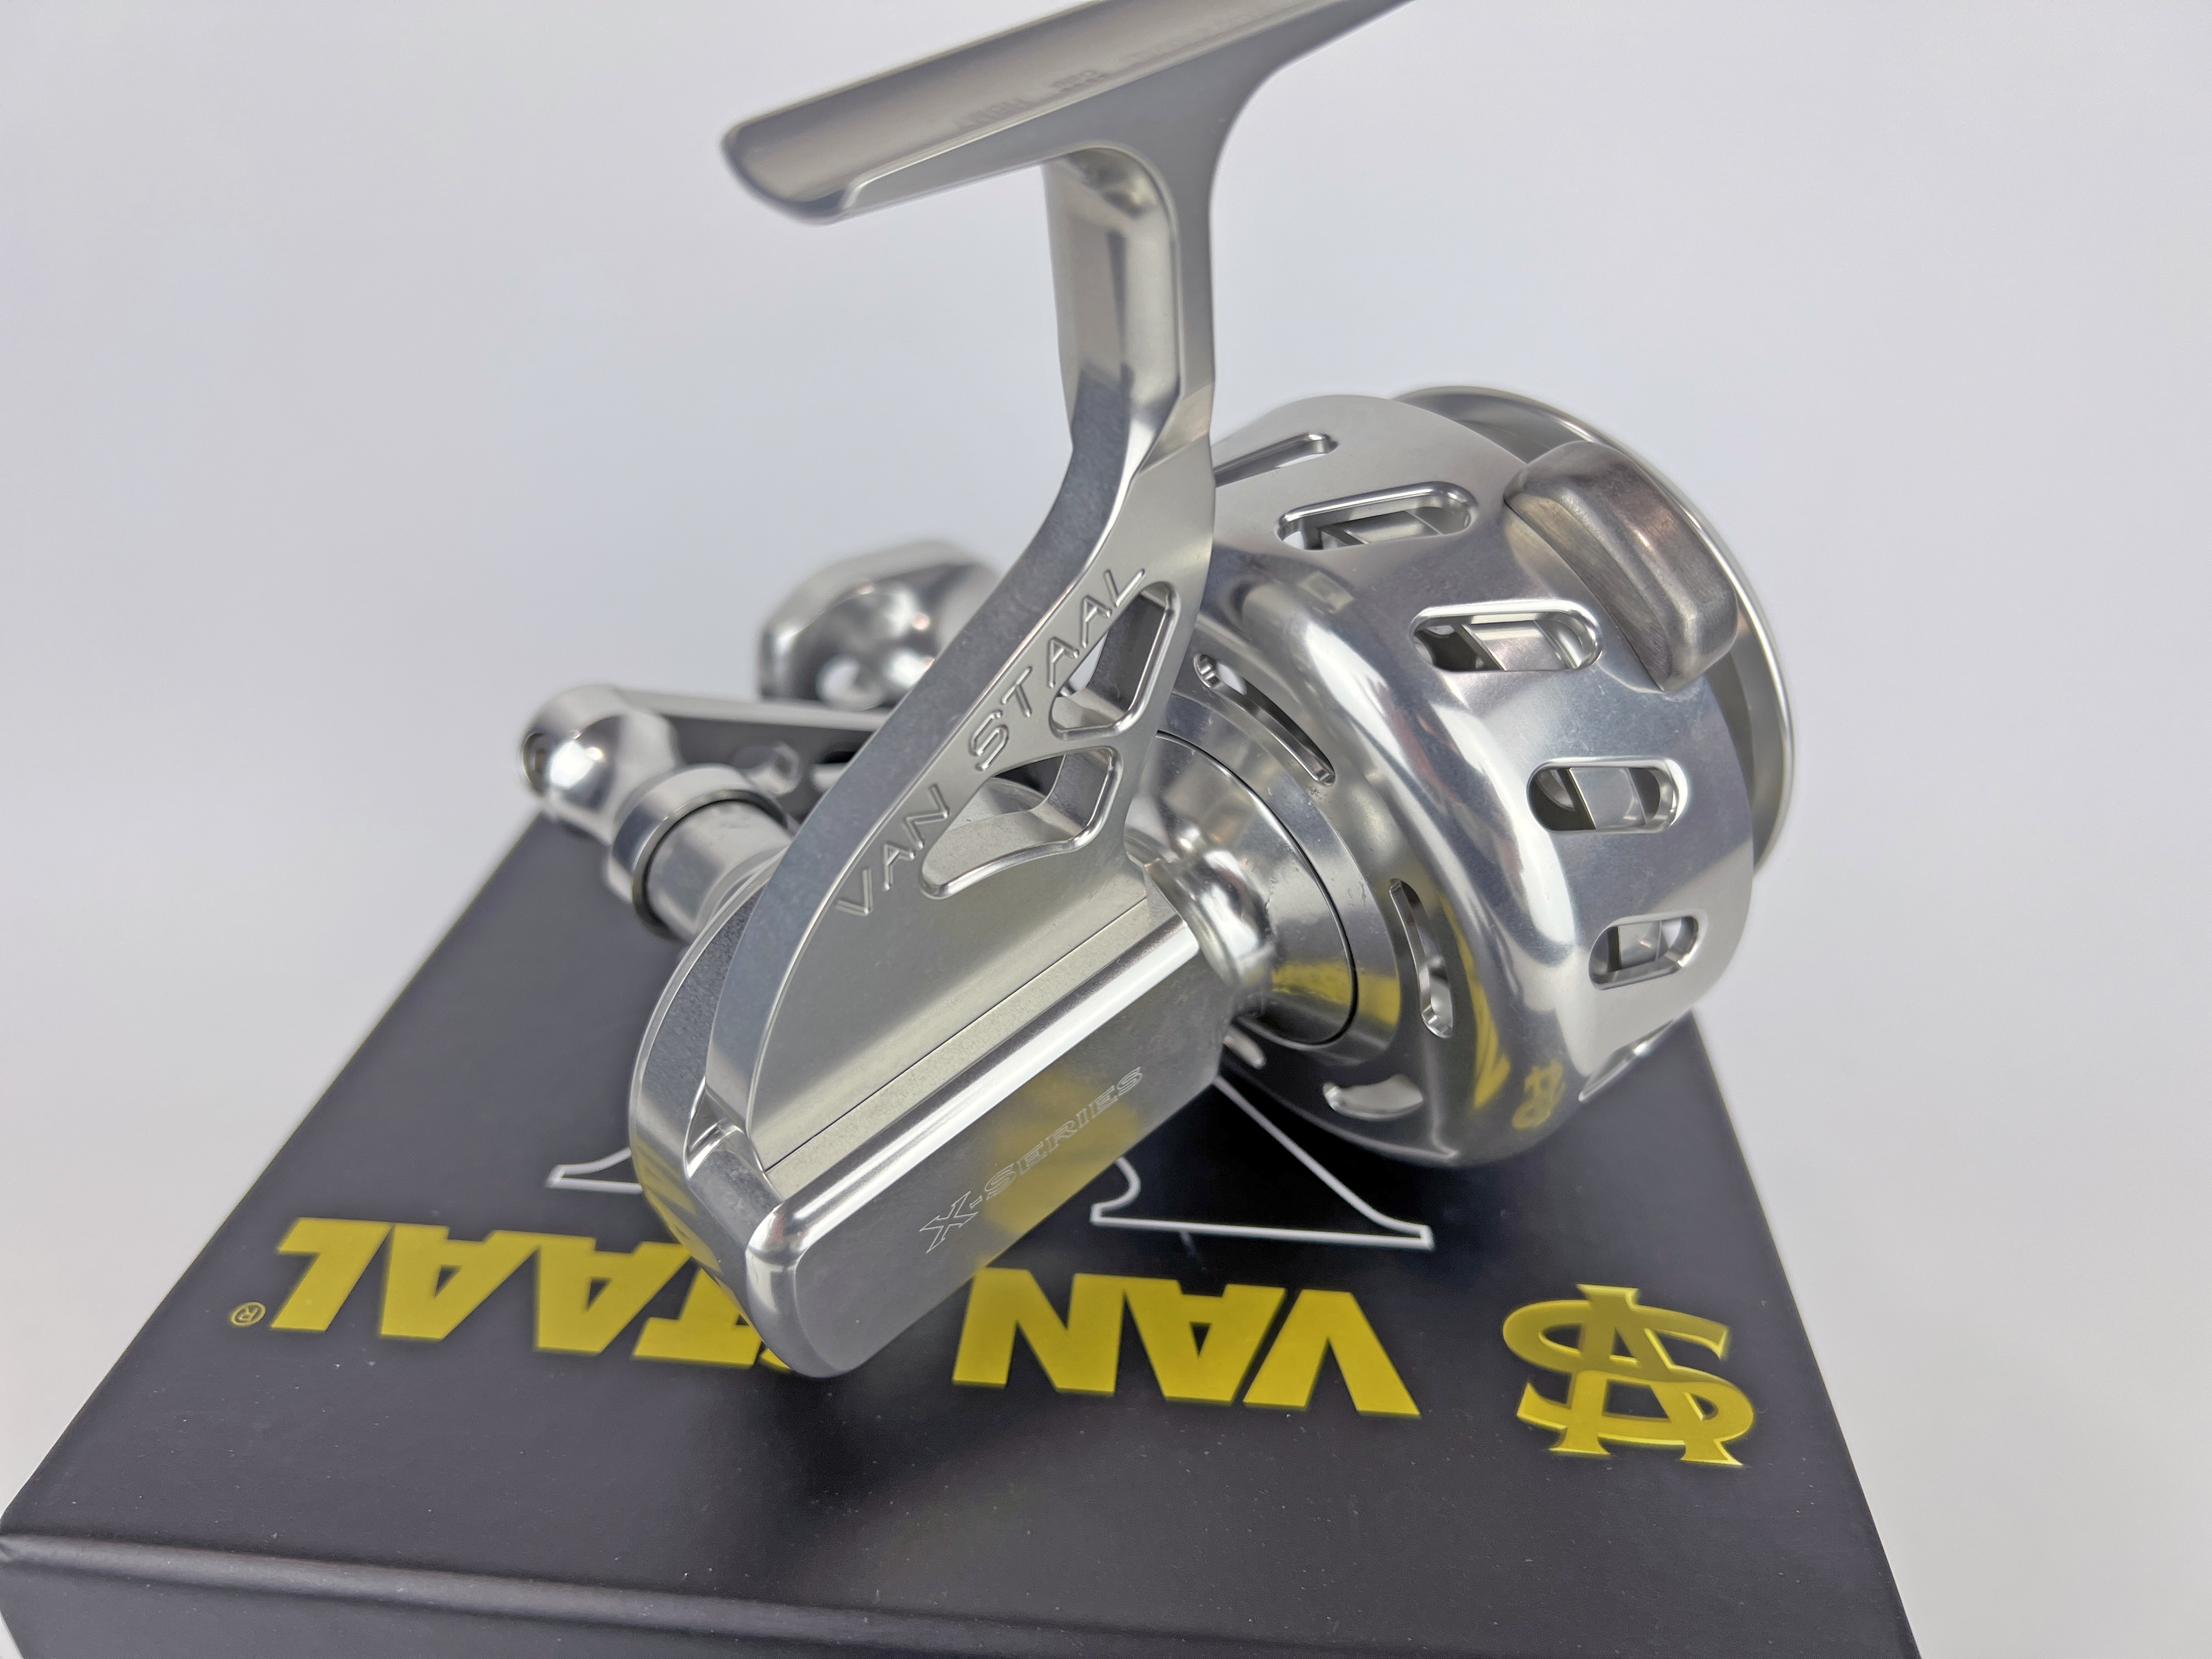 Van Staal X Series Spinning Reels – Glasgow Angling Centre